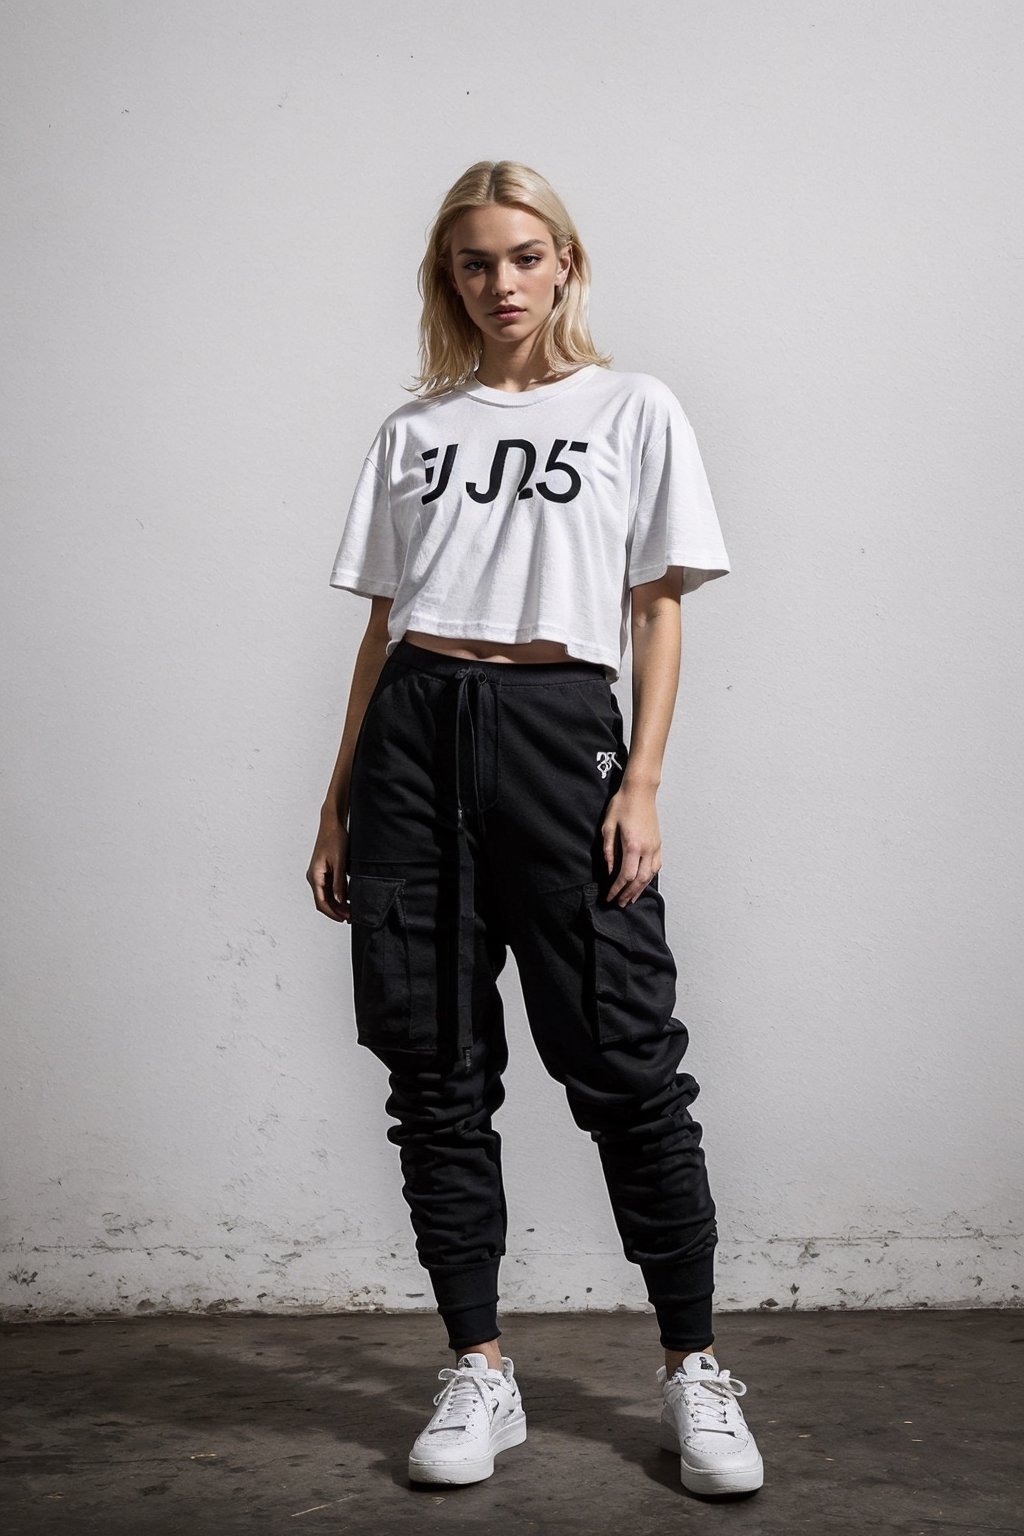 1girl, young white girl, hot top model, long blonde hair, wearing a white oversize t shirt (t shirt only white color) and Acronym J36-S black pants and Acronym P30A-DS and black and white sneakers, in city, instagram model, 80mm,urban techwear